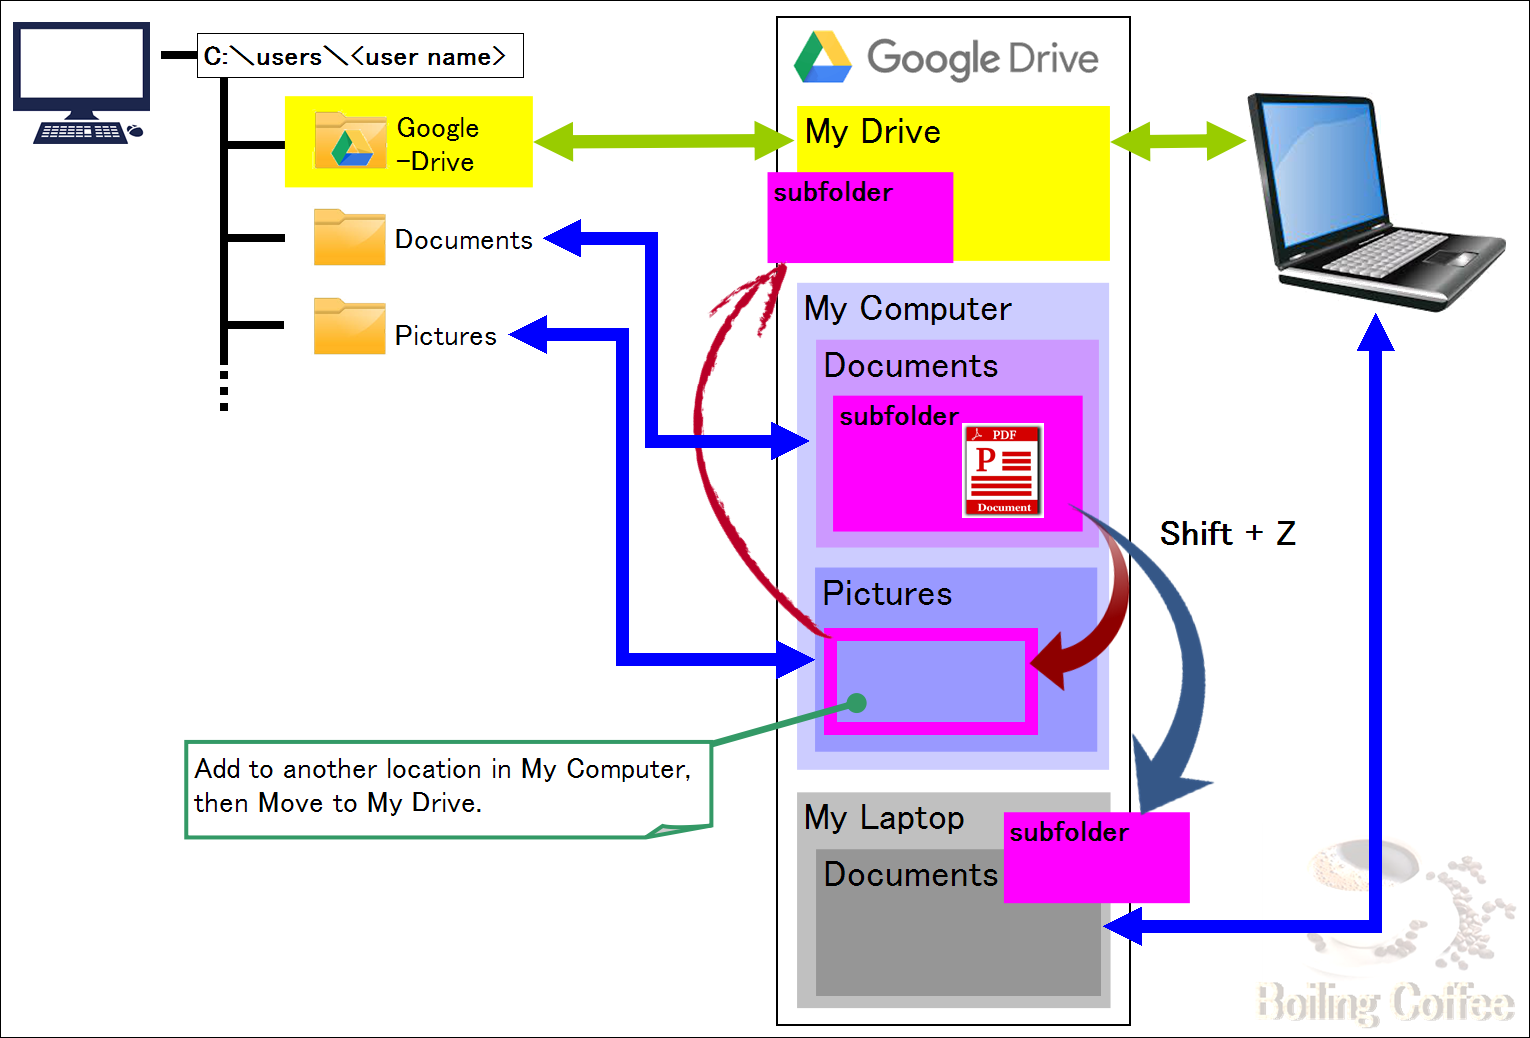 Can I sync two computers with Google Drive?